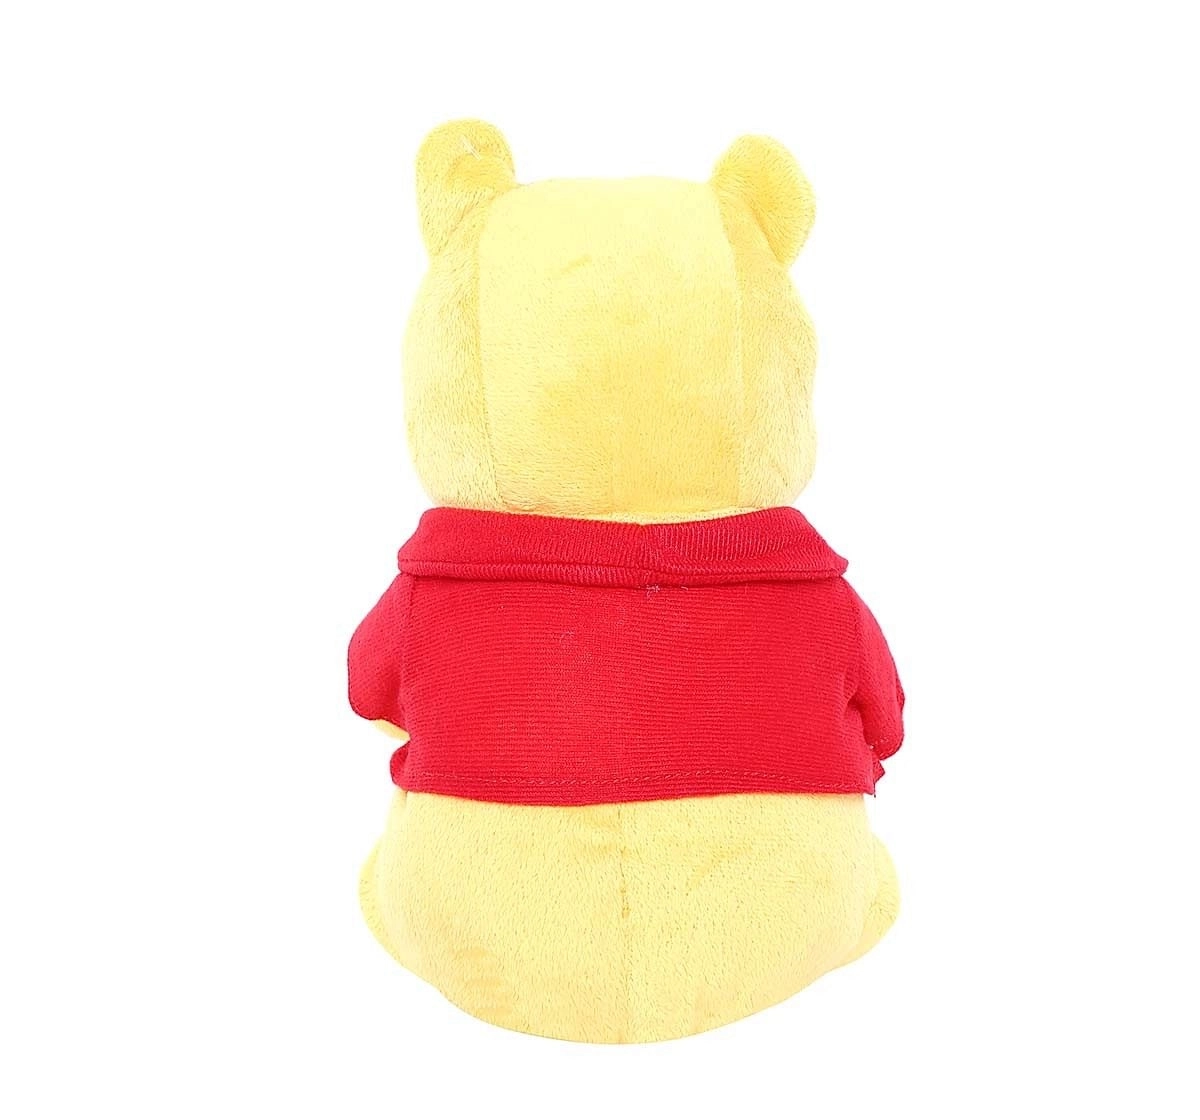 Disney Lazy Sleeping Pooh, Character Soft Toys for Kids age 0M+ 30 Cm 